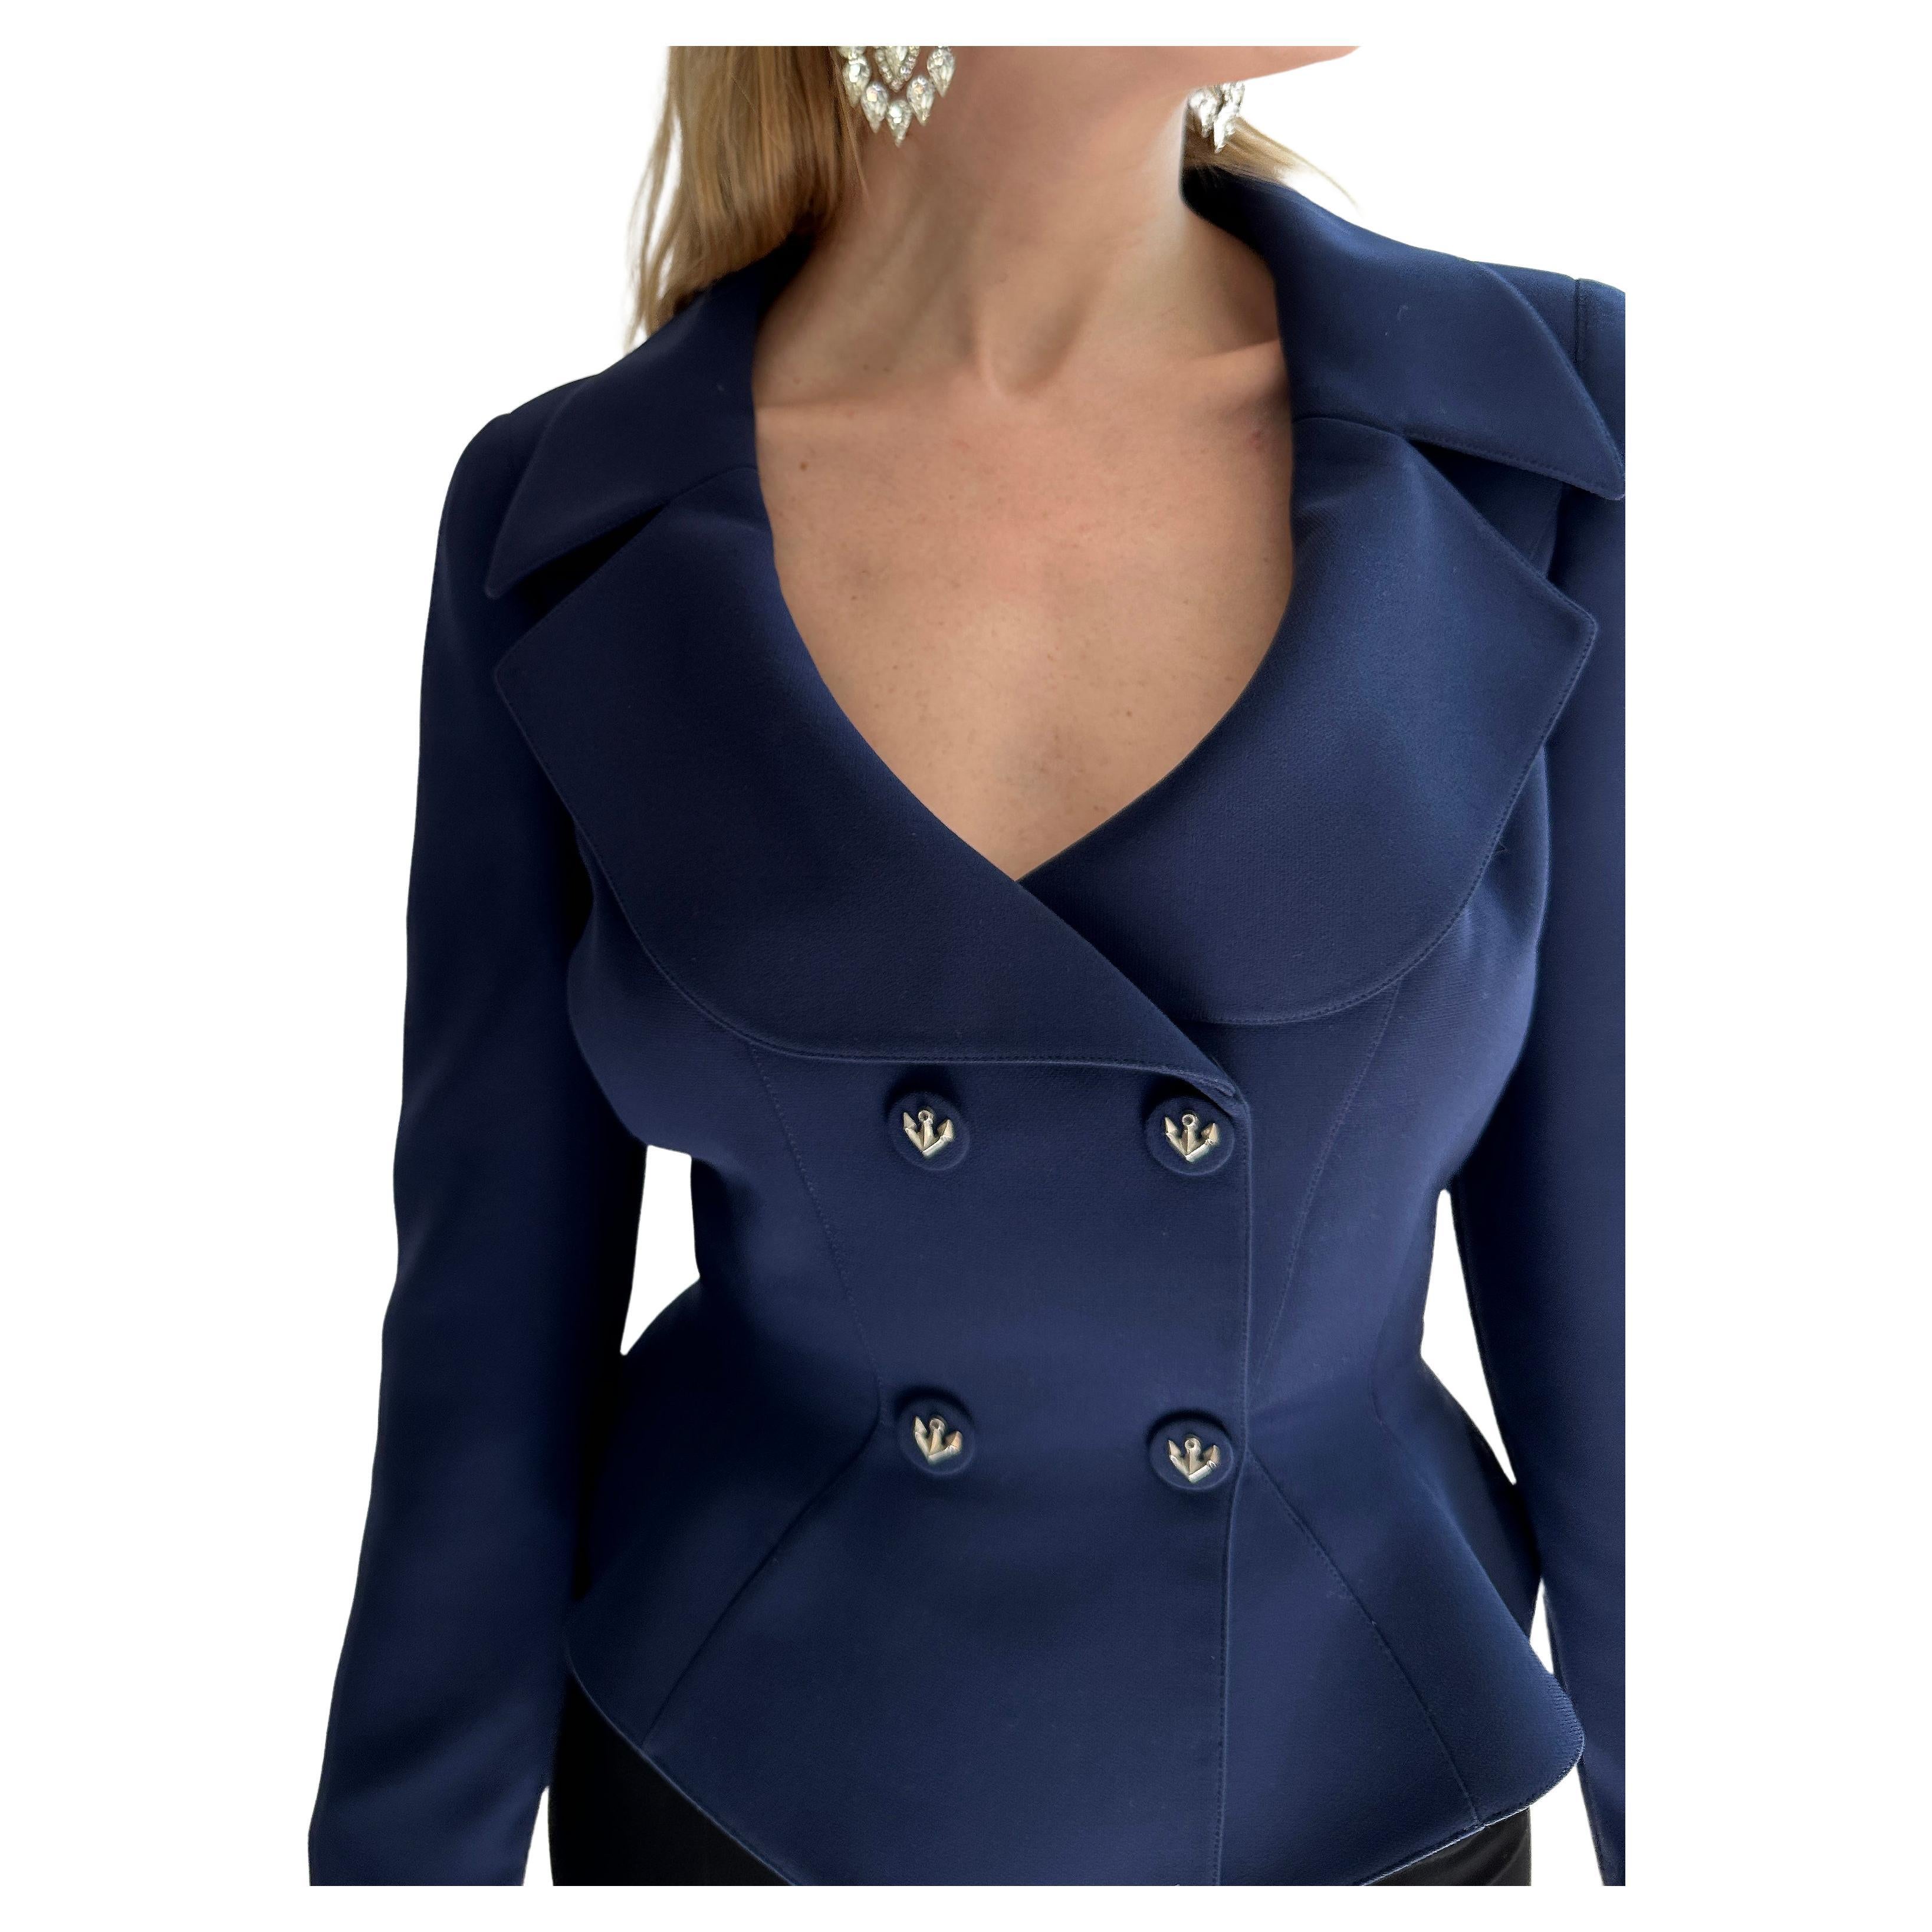 Vintage Thierry Mugler Navy Blue Jacket circa 1989 For Sale